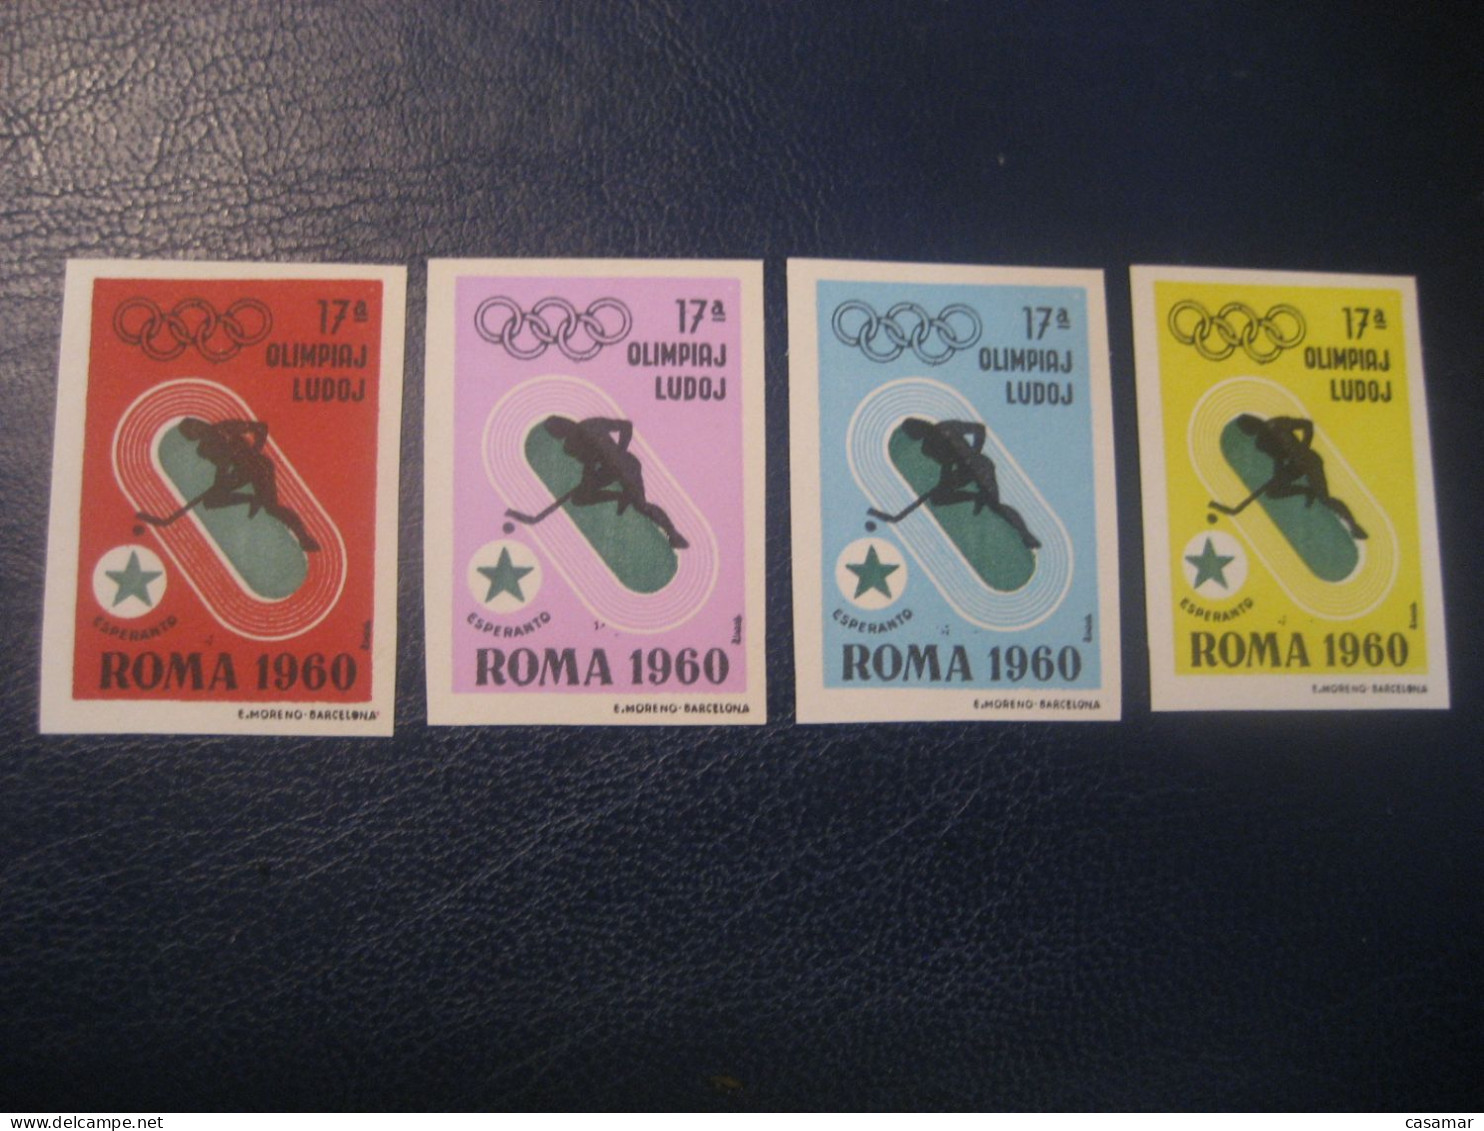 ROMA 1960 Ice Hockey Sur Glace Olympic Games Olympics Esperanto 4 Imperforated Poster Stamp Vignette ITALY Spain Label - Hockey (su Ghiaccio)